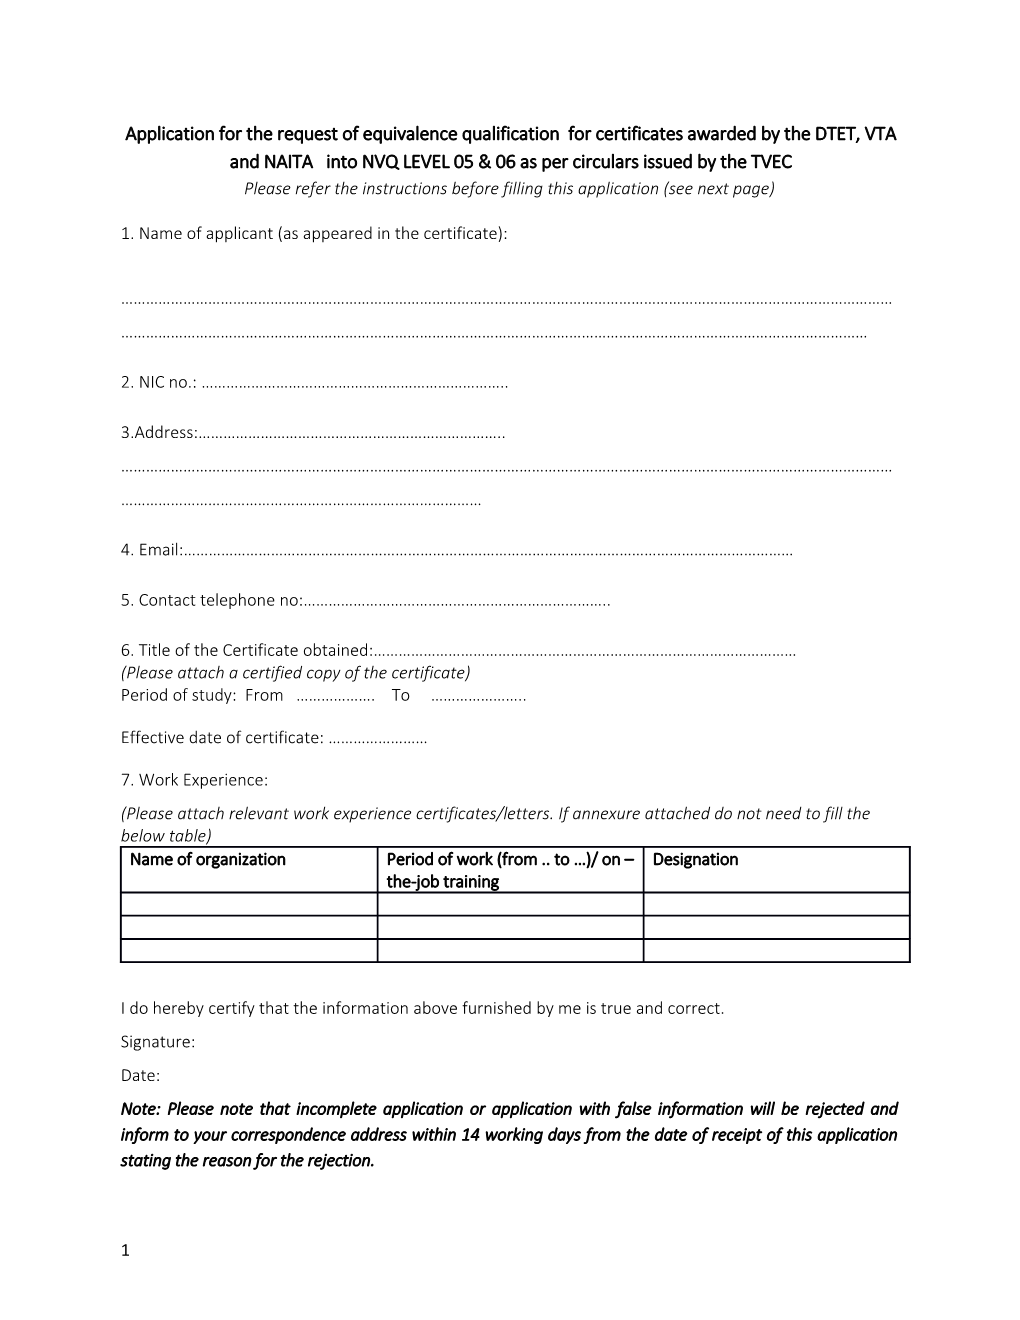 Please Refer the Instructions Before Filling This Application (See Next Page)